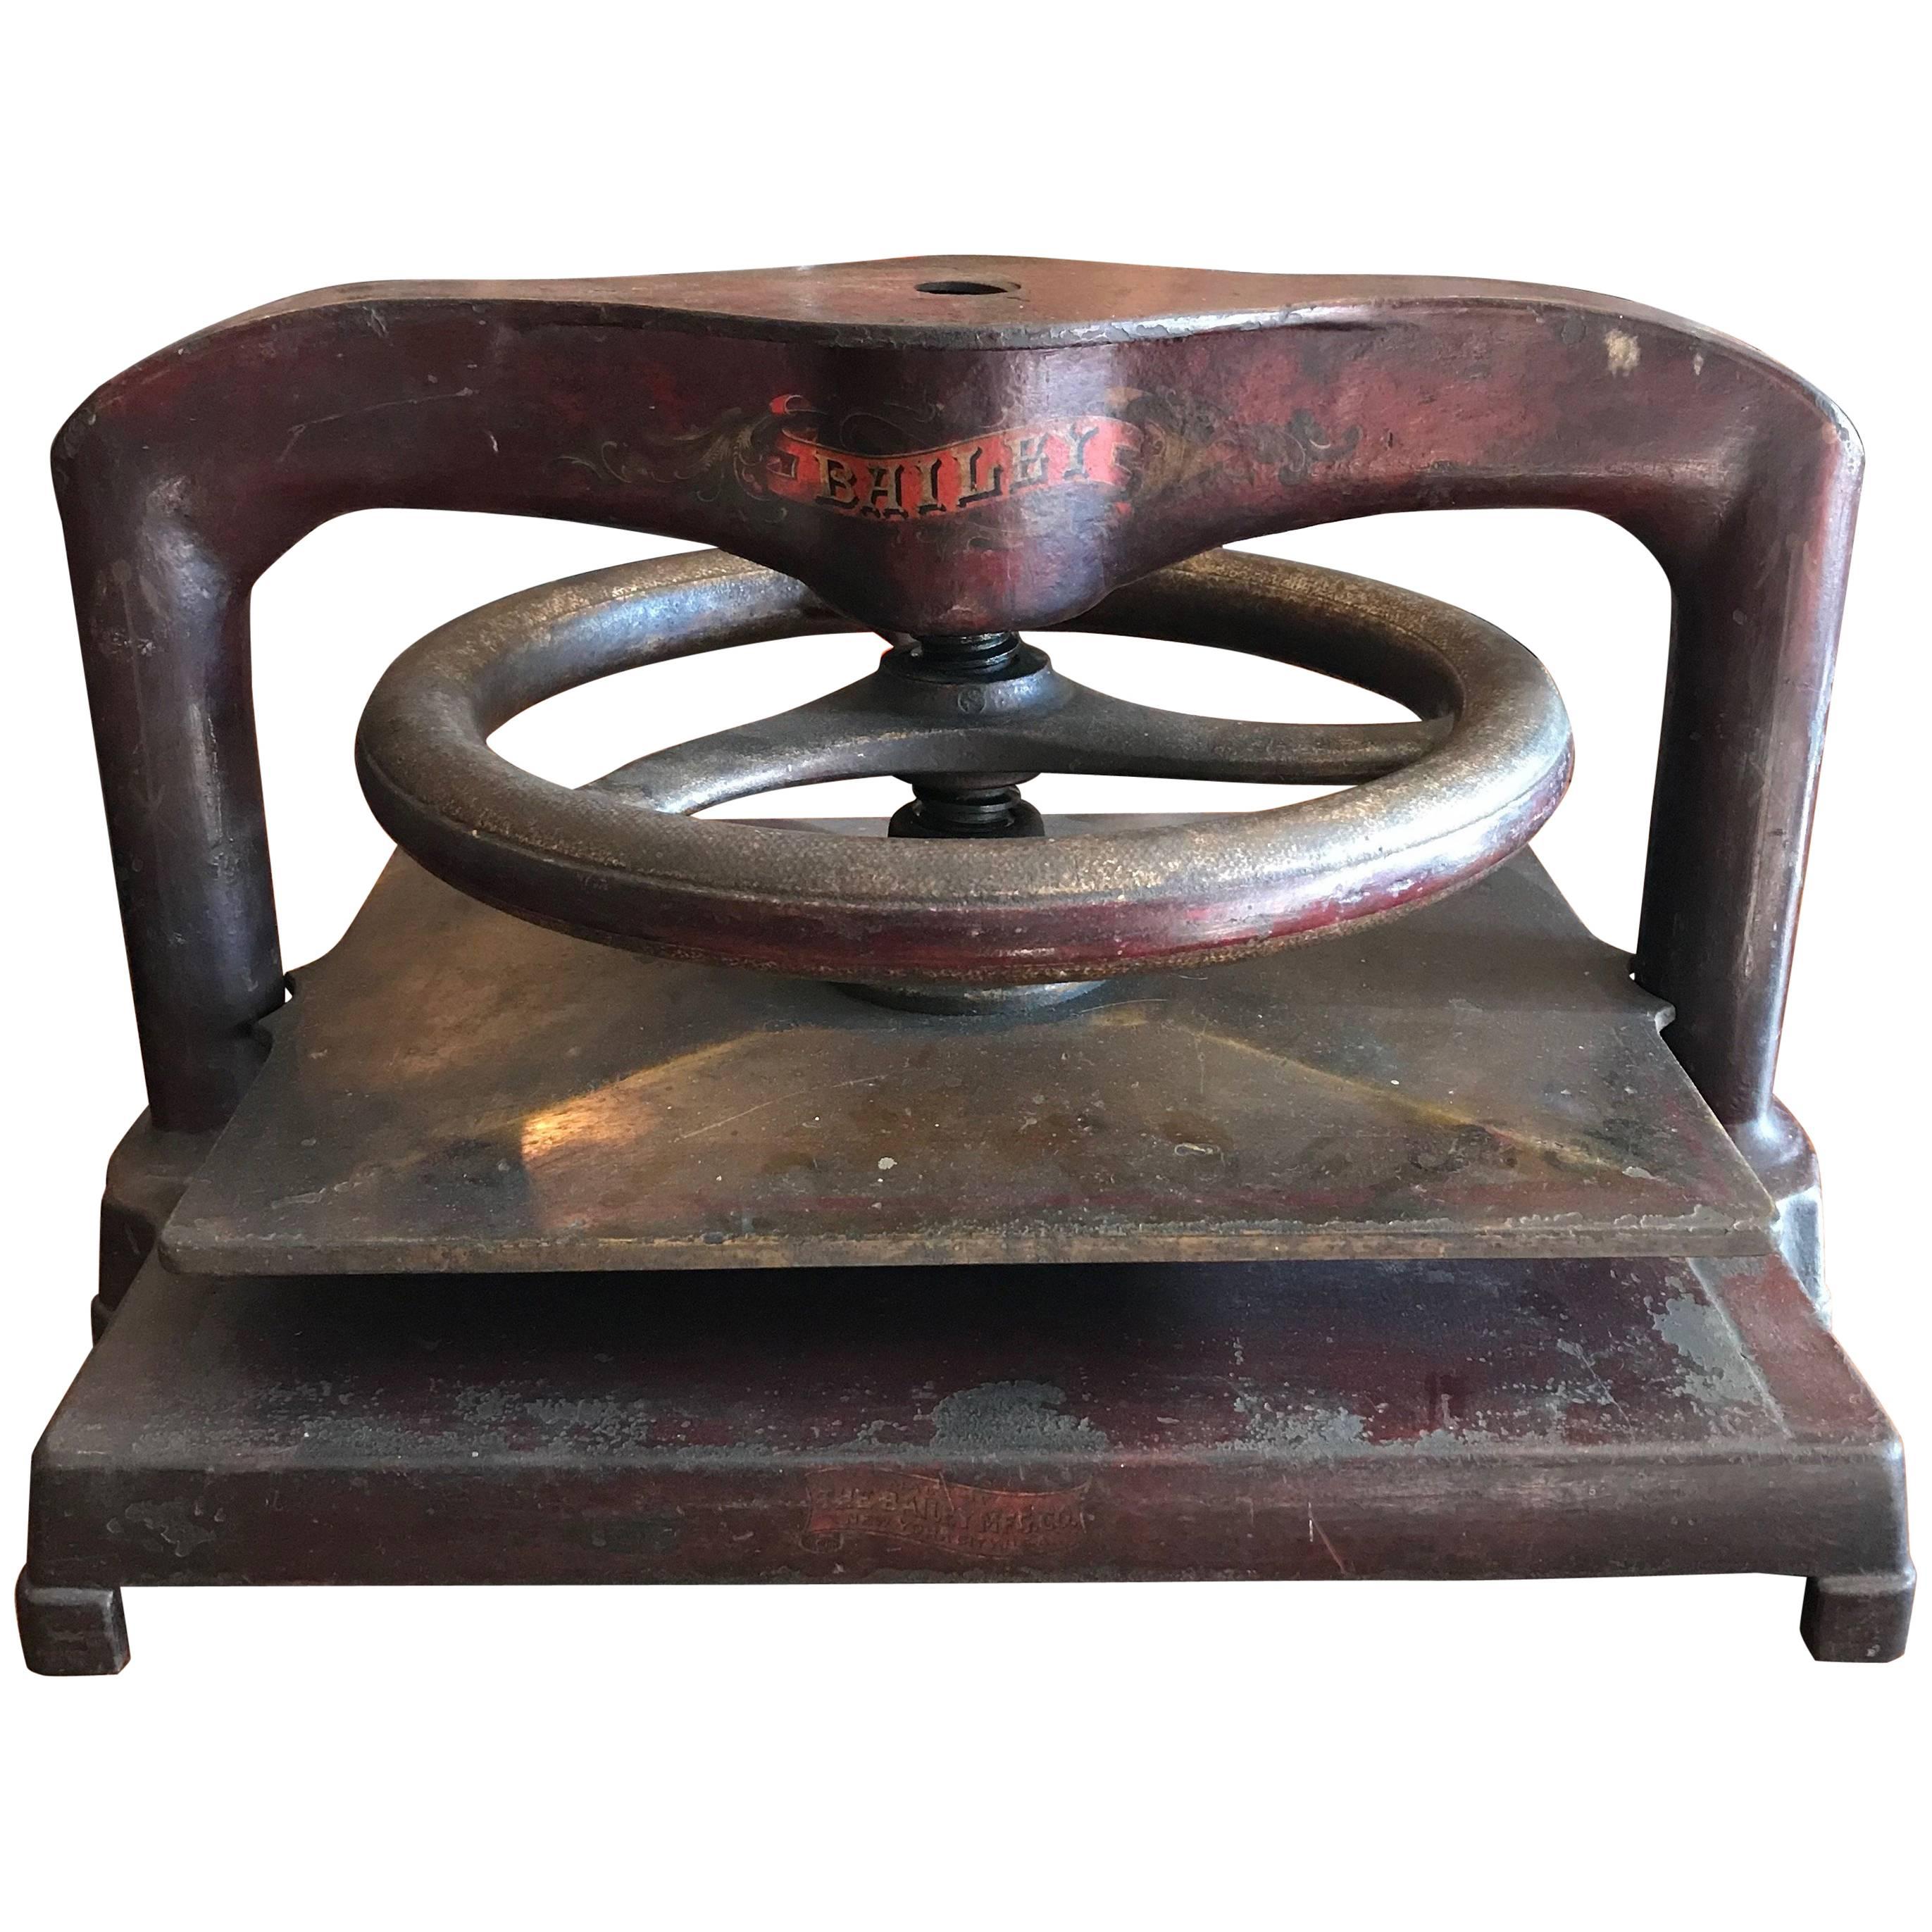 Large Hand-Painted Cast Iron Letter Copying Machine Book Press by Bailey